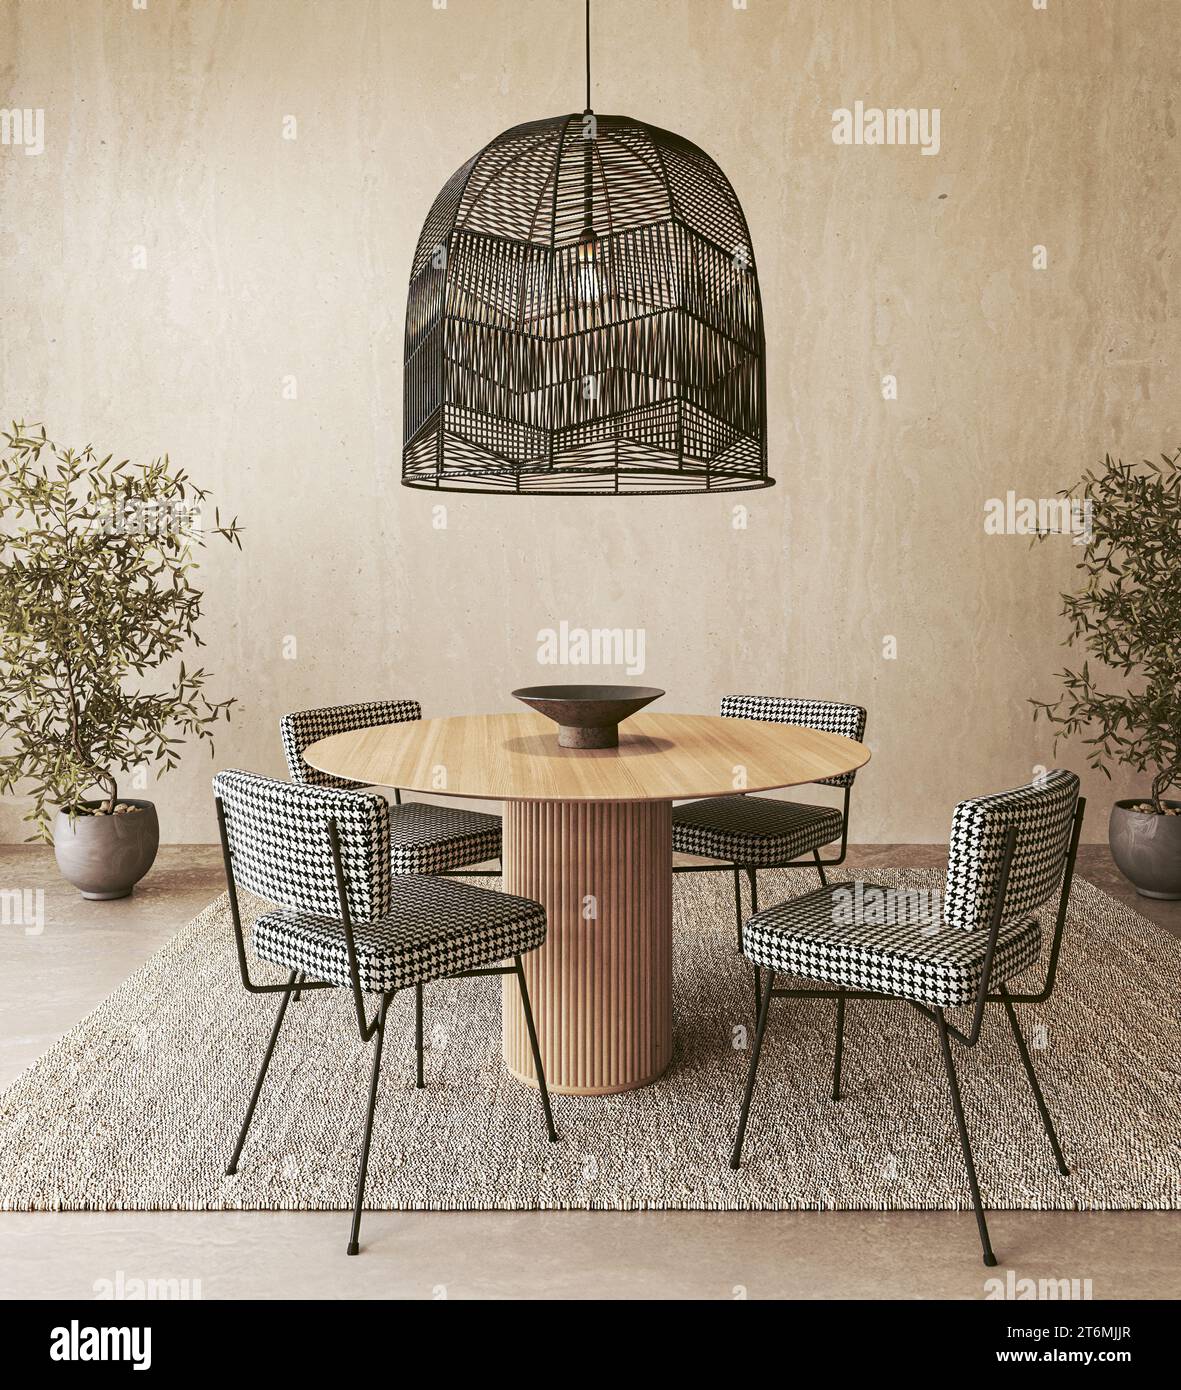 Stylish Dining Room with Houndstooth Chairs and Pendant Light Stock Photo